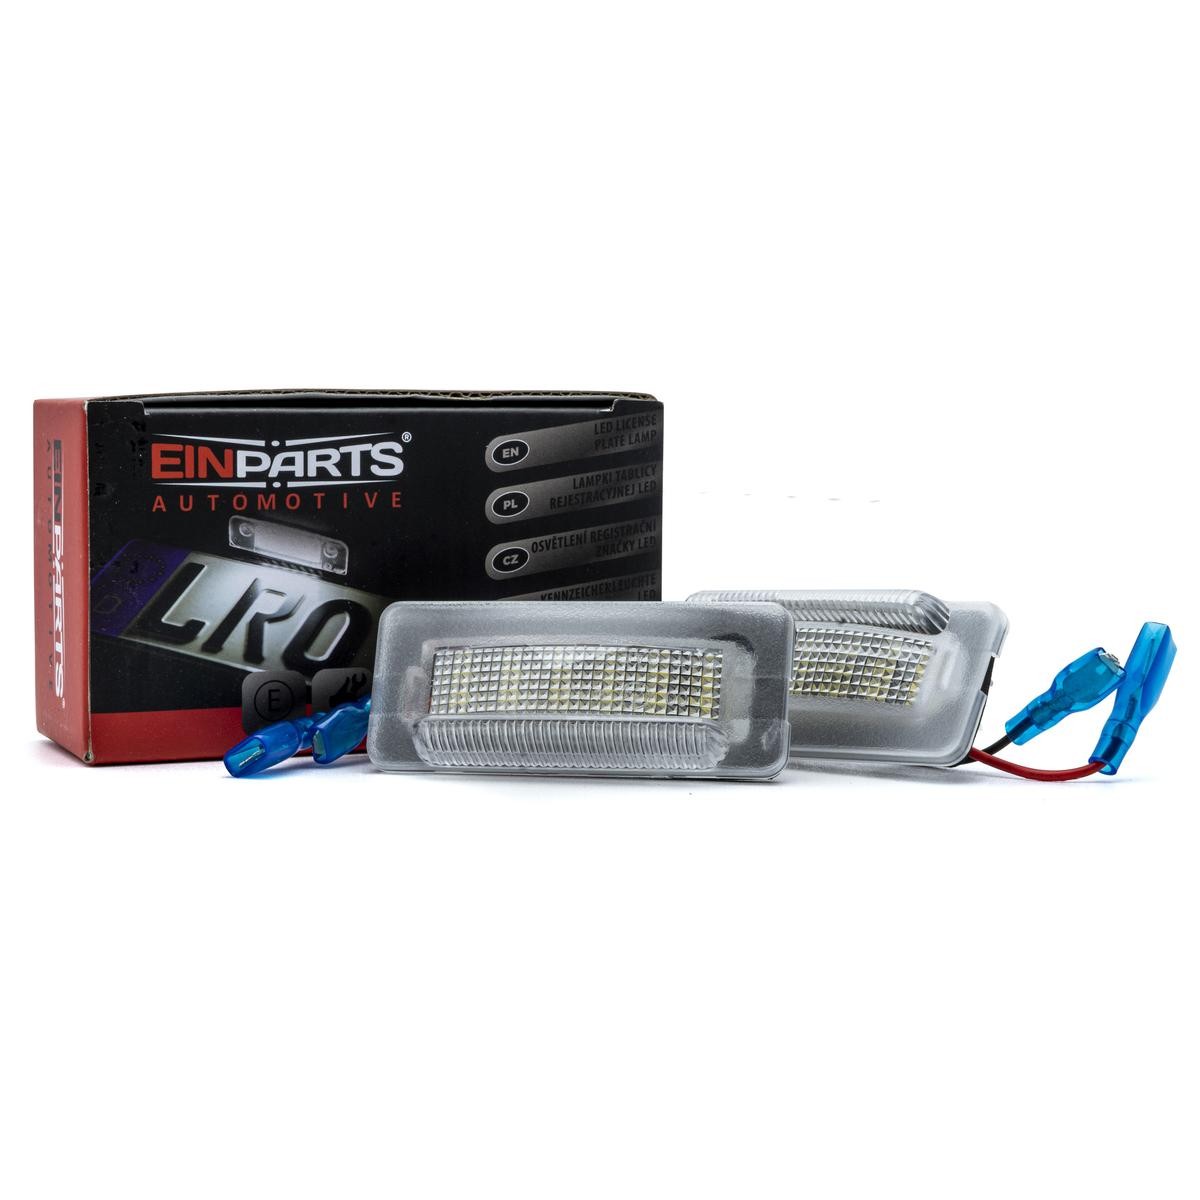 Dodge Licence Plate Light EINPARTS EP168 at a good price